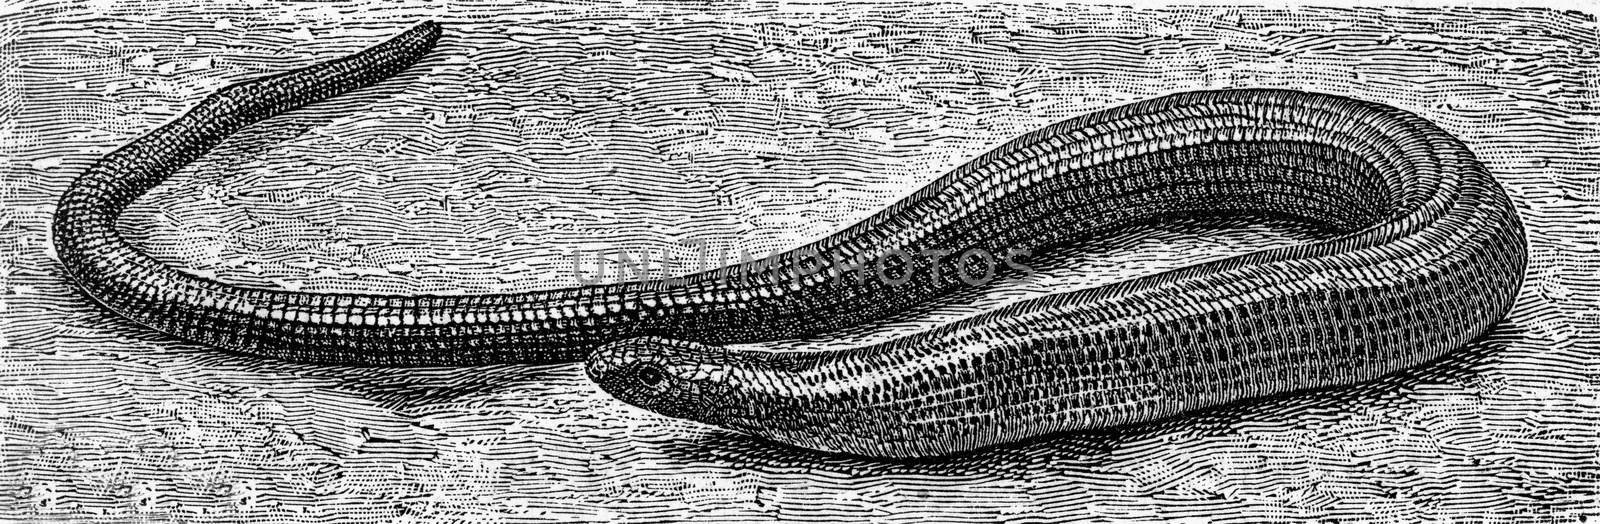 The slow worm, vintage engraving. by Morphart